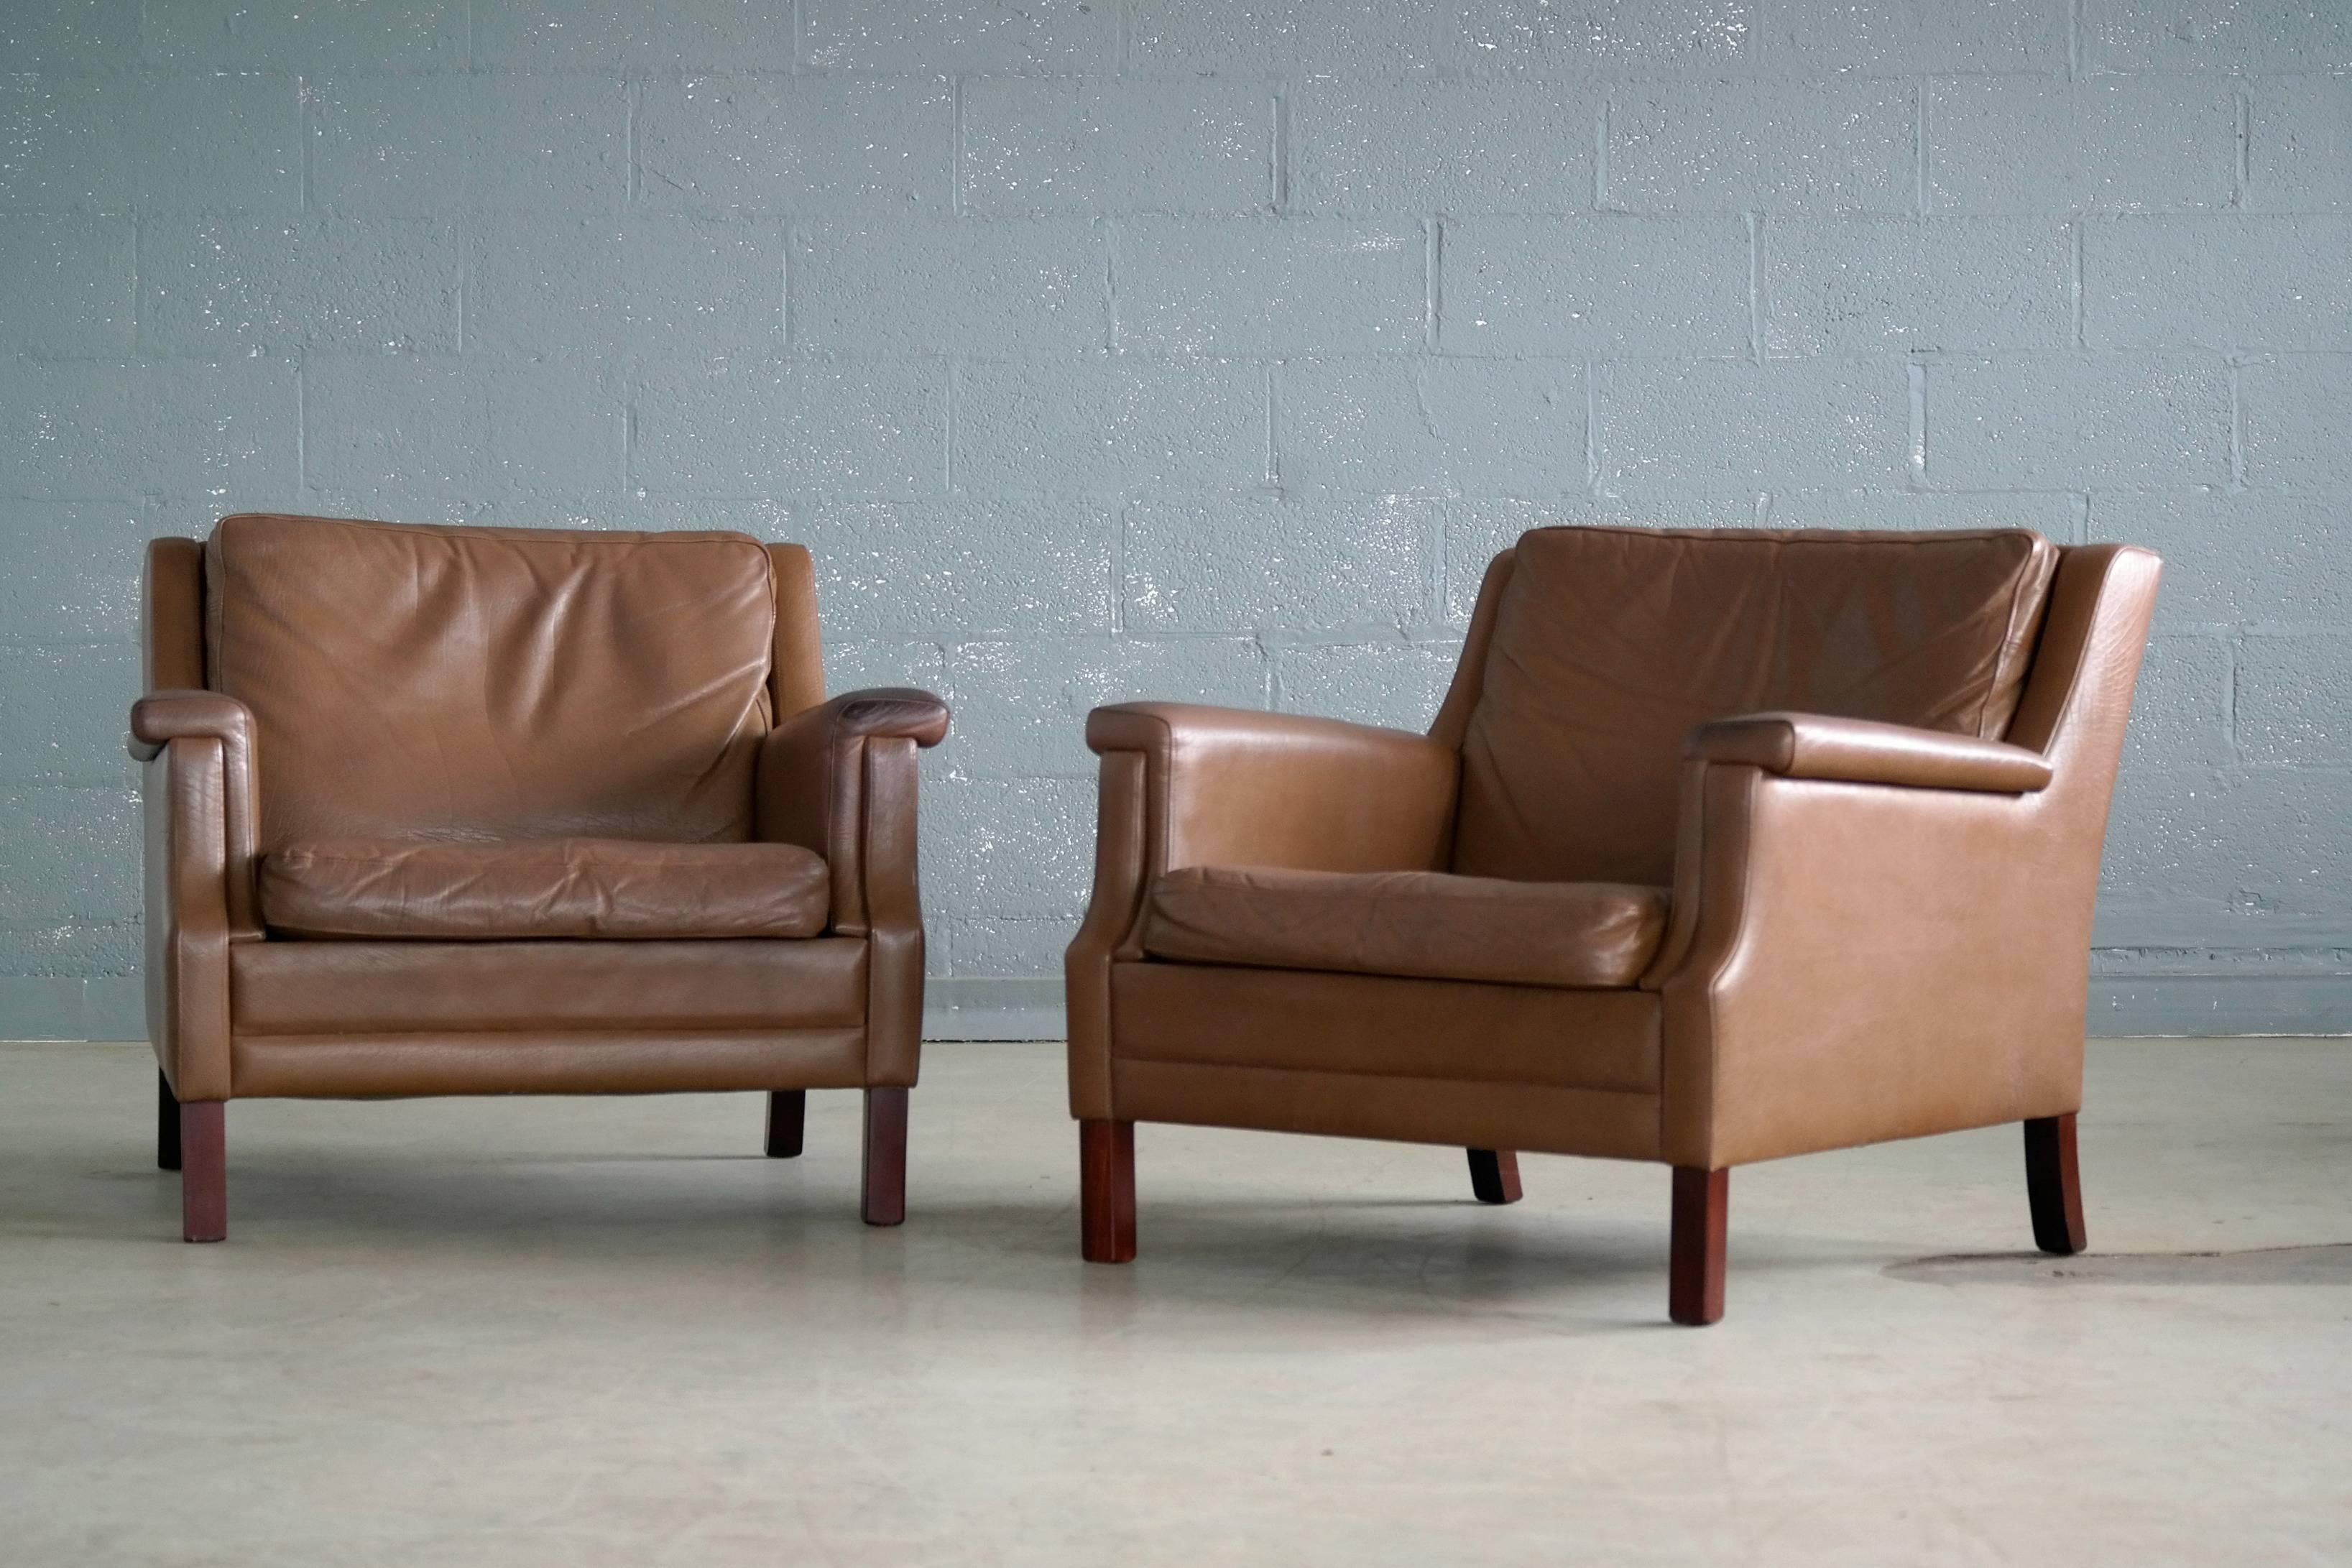 Elegant pair of Danish midcentury easy lounge or club chairs in the style of Borge Mogensen. These chairs have a slightly more intricate and formal armrest design giving them a nice presence. The leather shows natural wear and patina throughout and